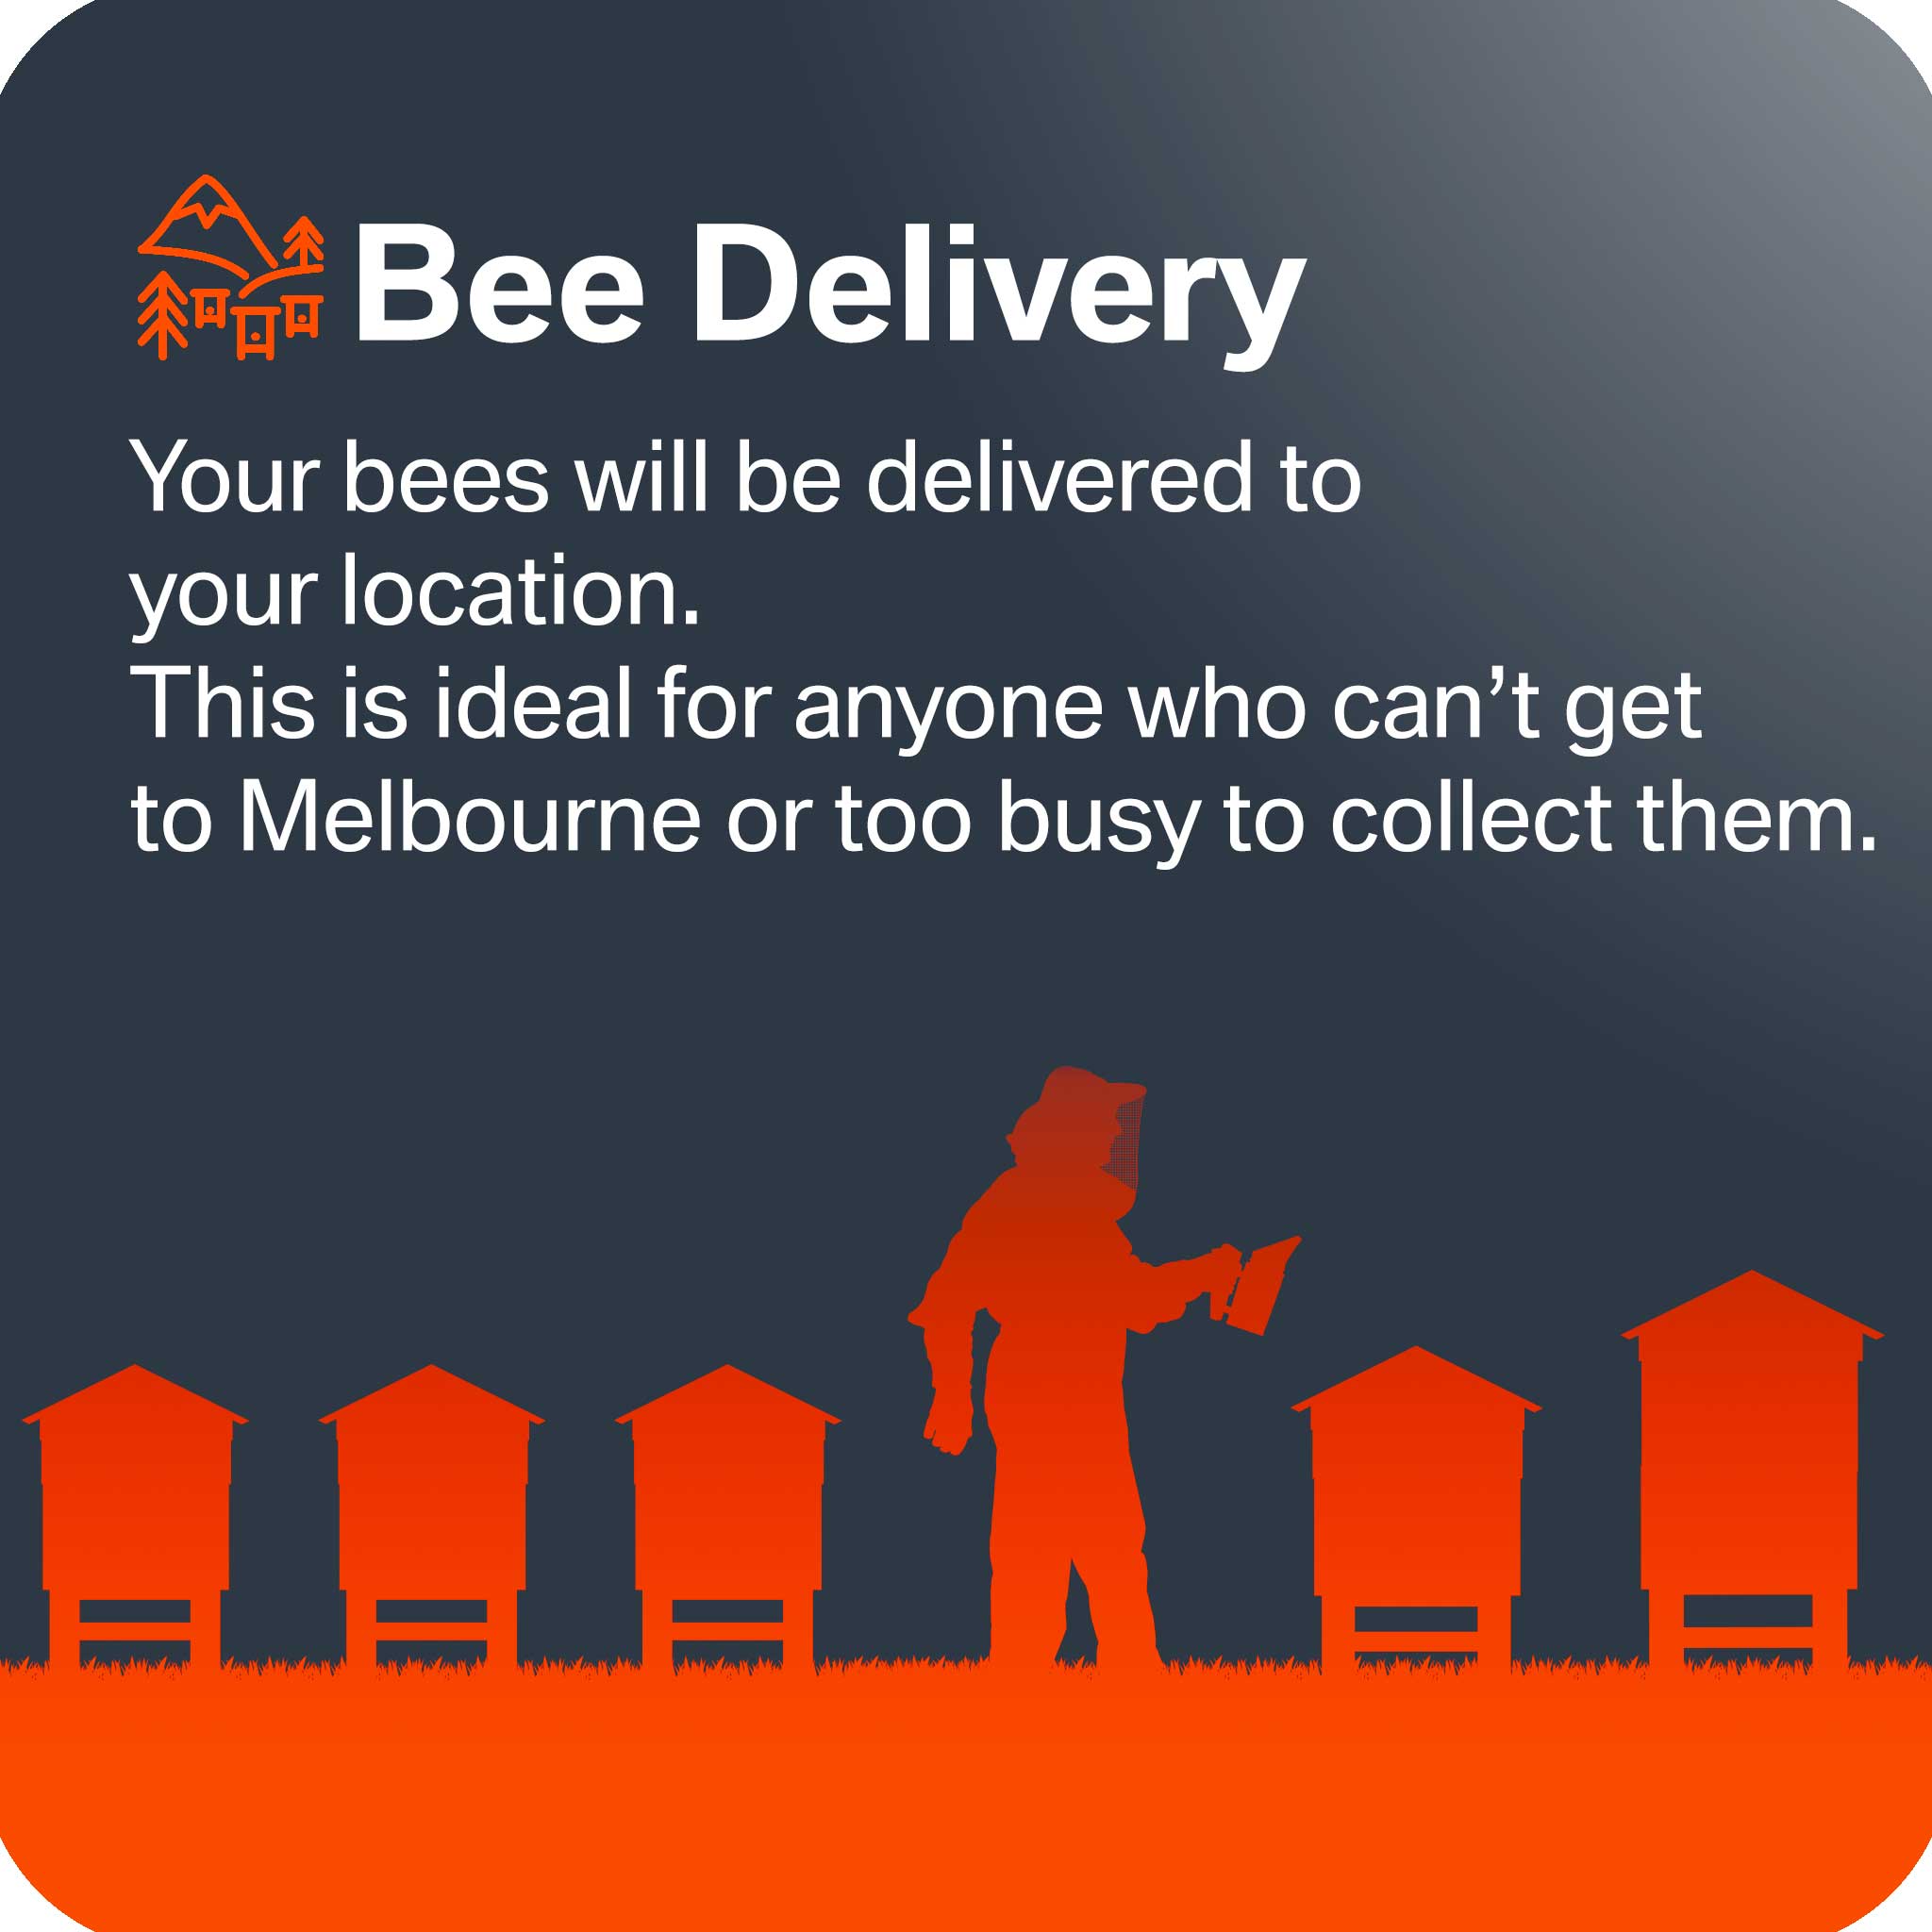 Honey Bees for Sale - Bees collection by Buzzbee Beekeeping Supplies